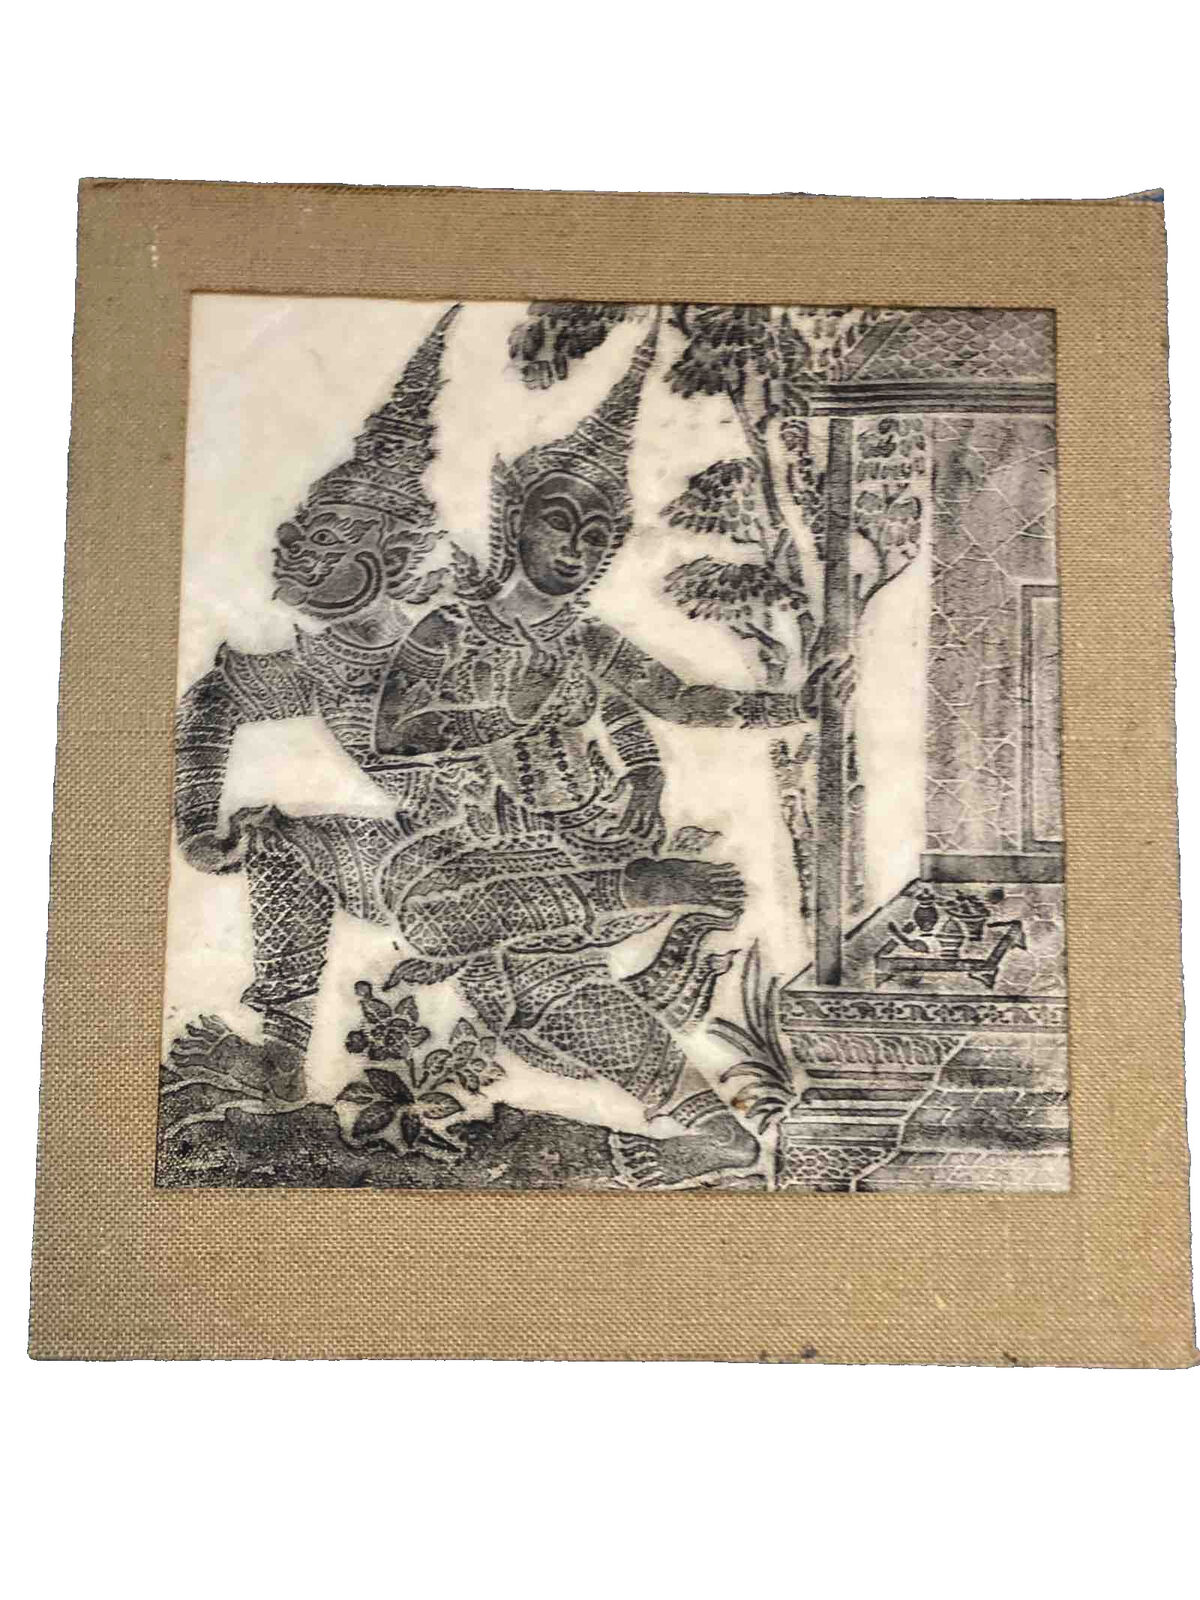 VNTG  Charcoal Rubbing On Rice Paper Art Cambodia Temple Ramayana Epic 21”x22”